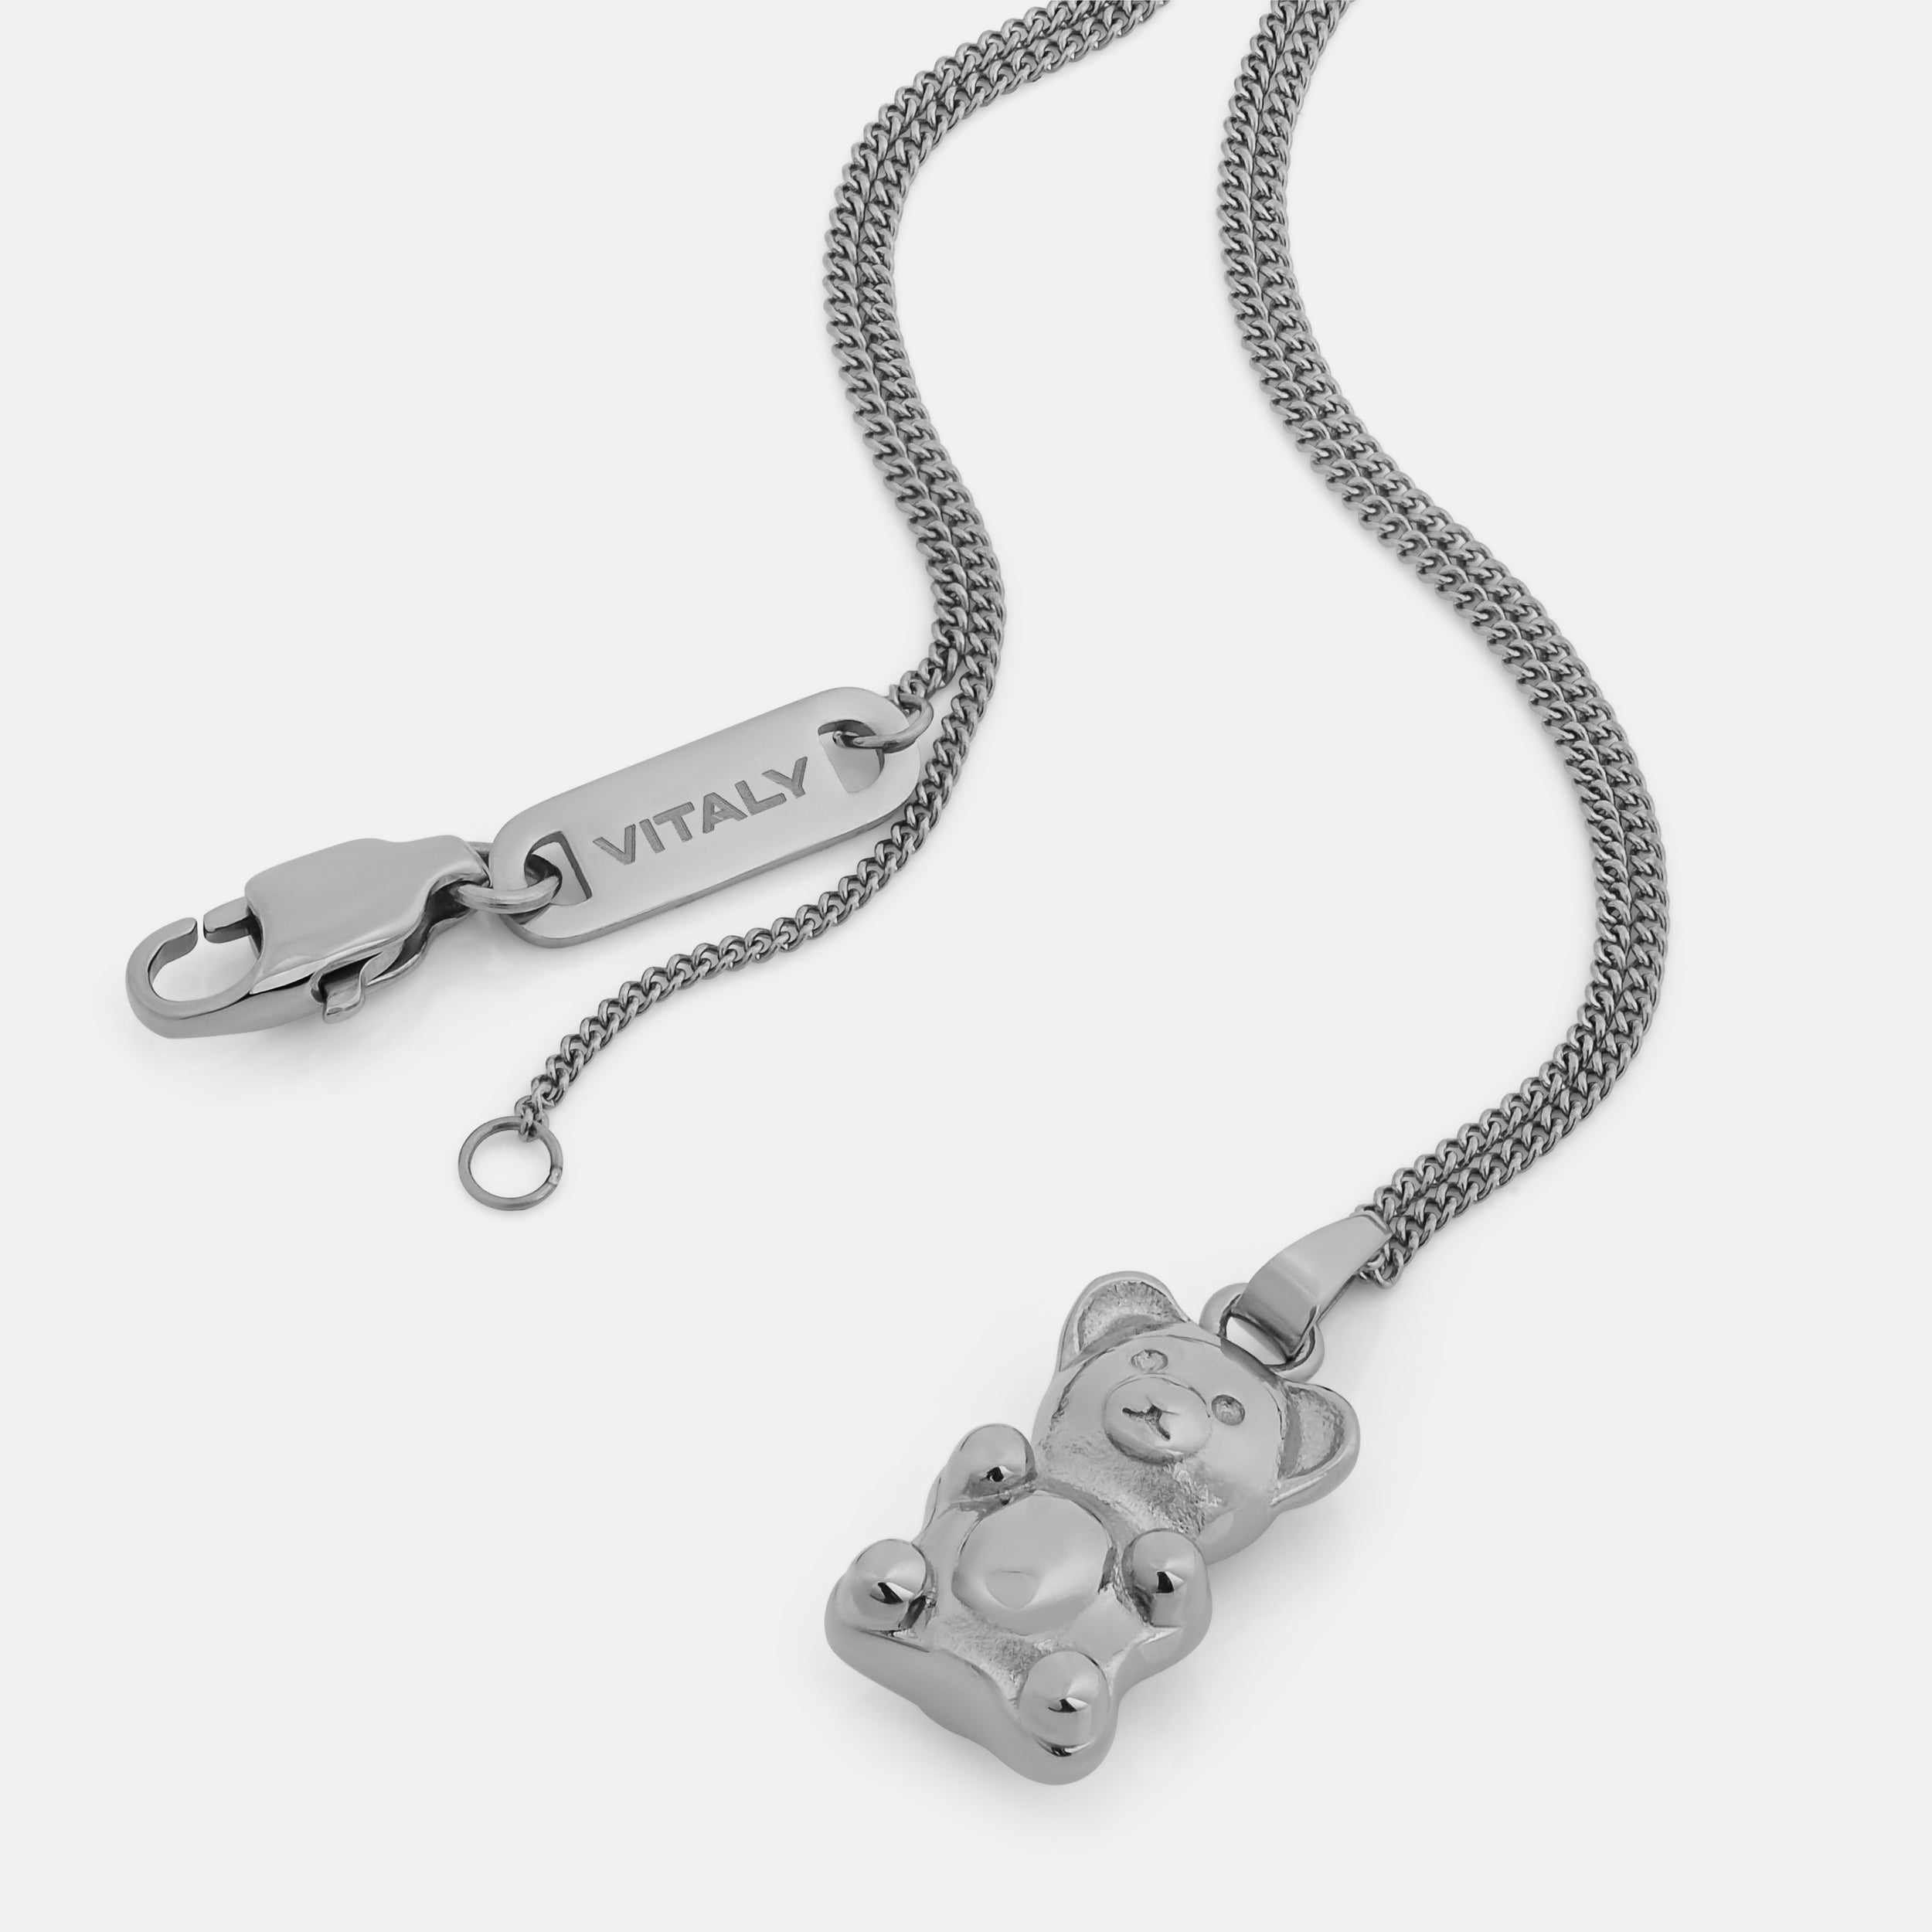 Vitaly Gummybear Pendant | 100% Recycled Stainless Steel Accessories